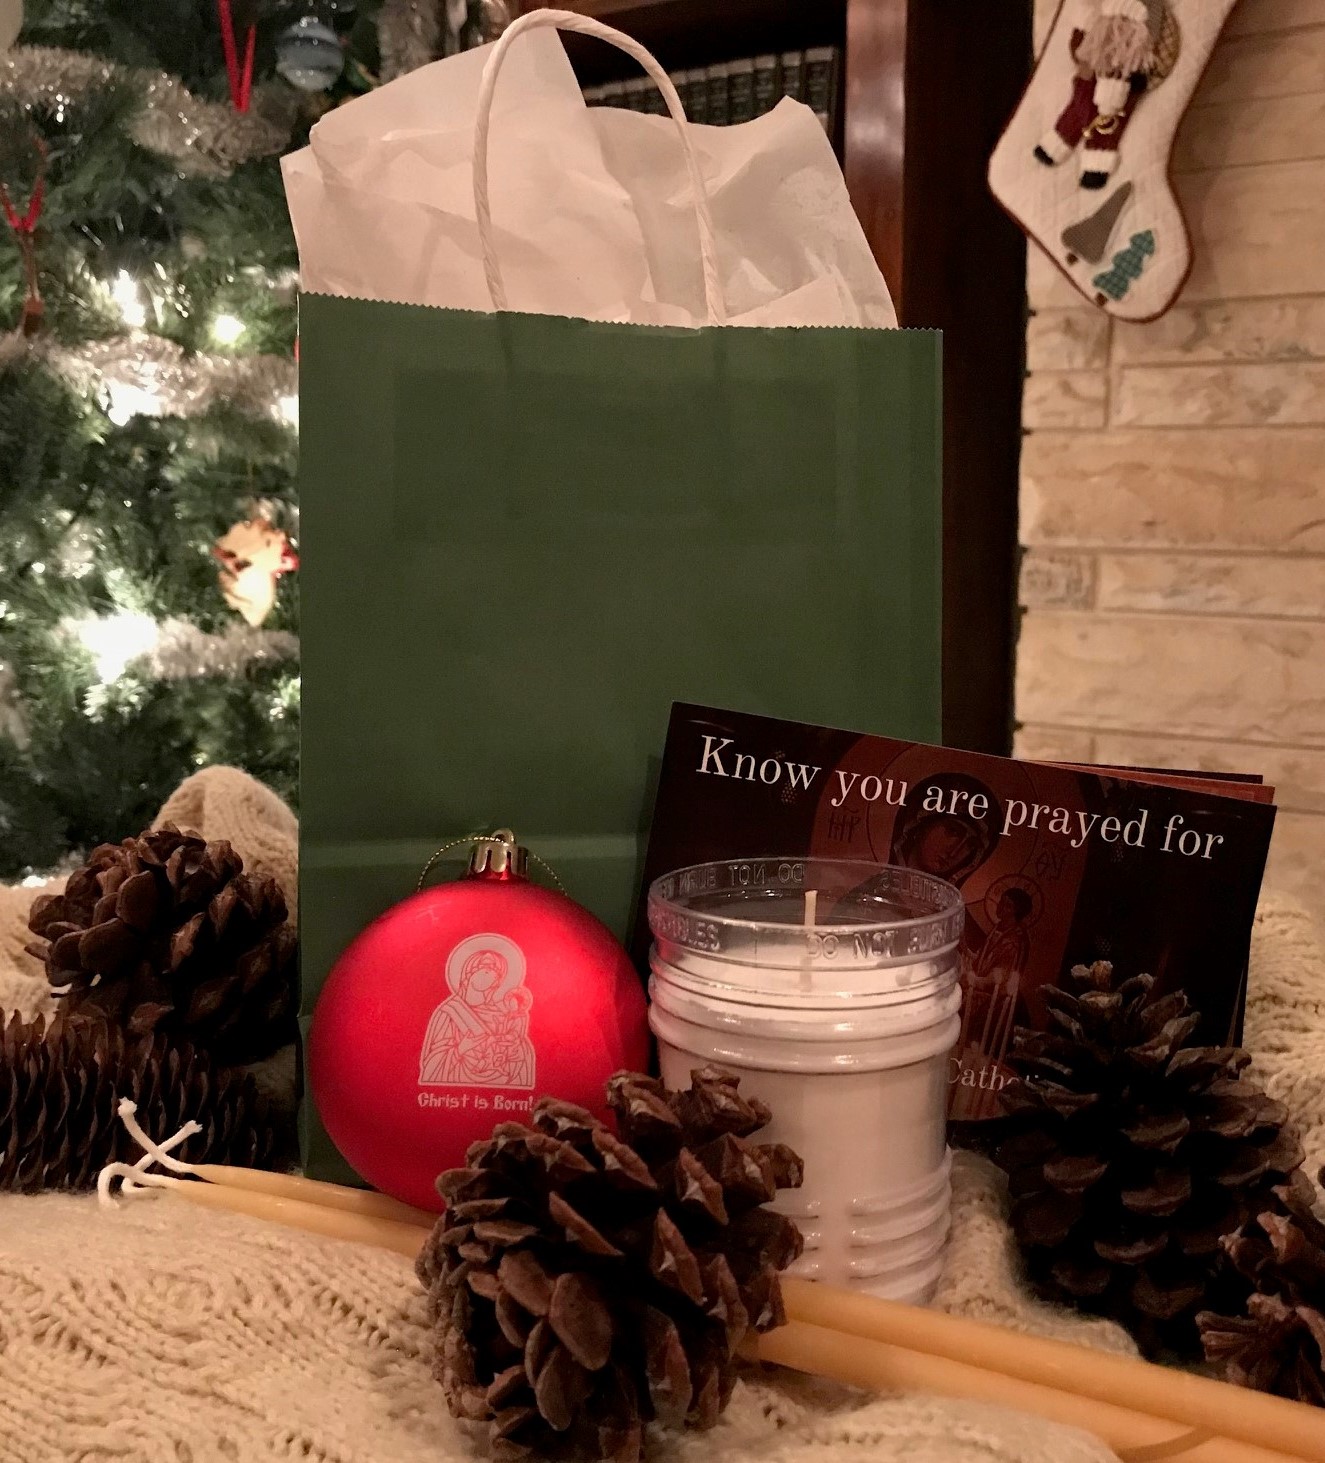 The simple contents of the Christmas Hope Bag help parishioners turn to prayer and share the light and hope that Christ brings.